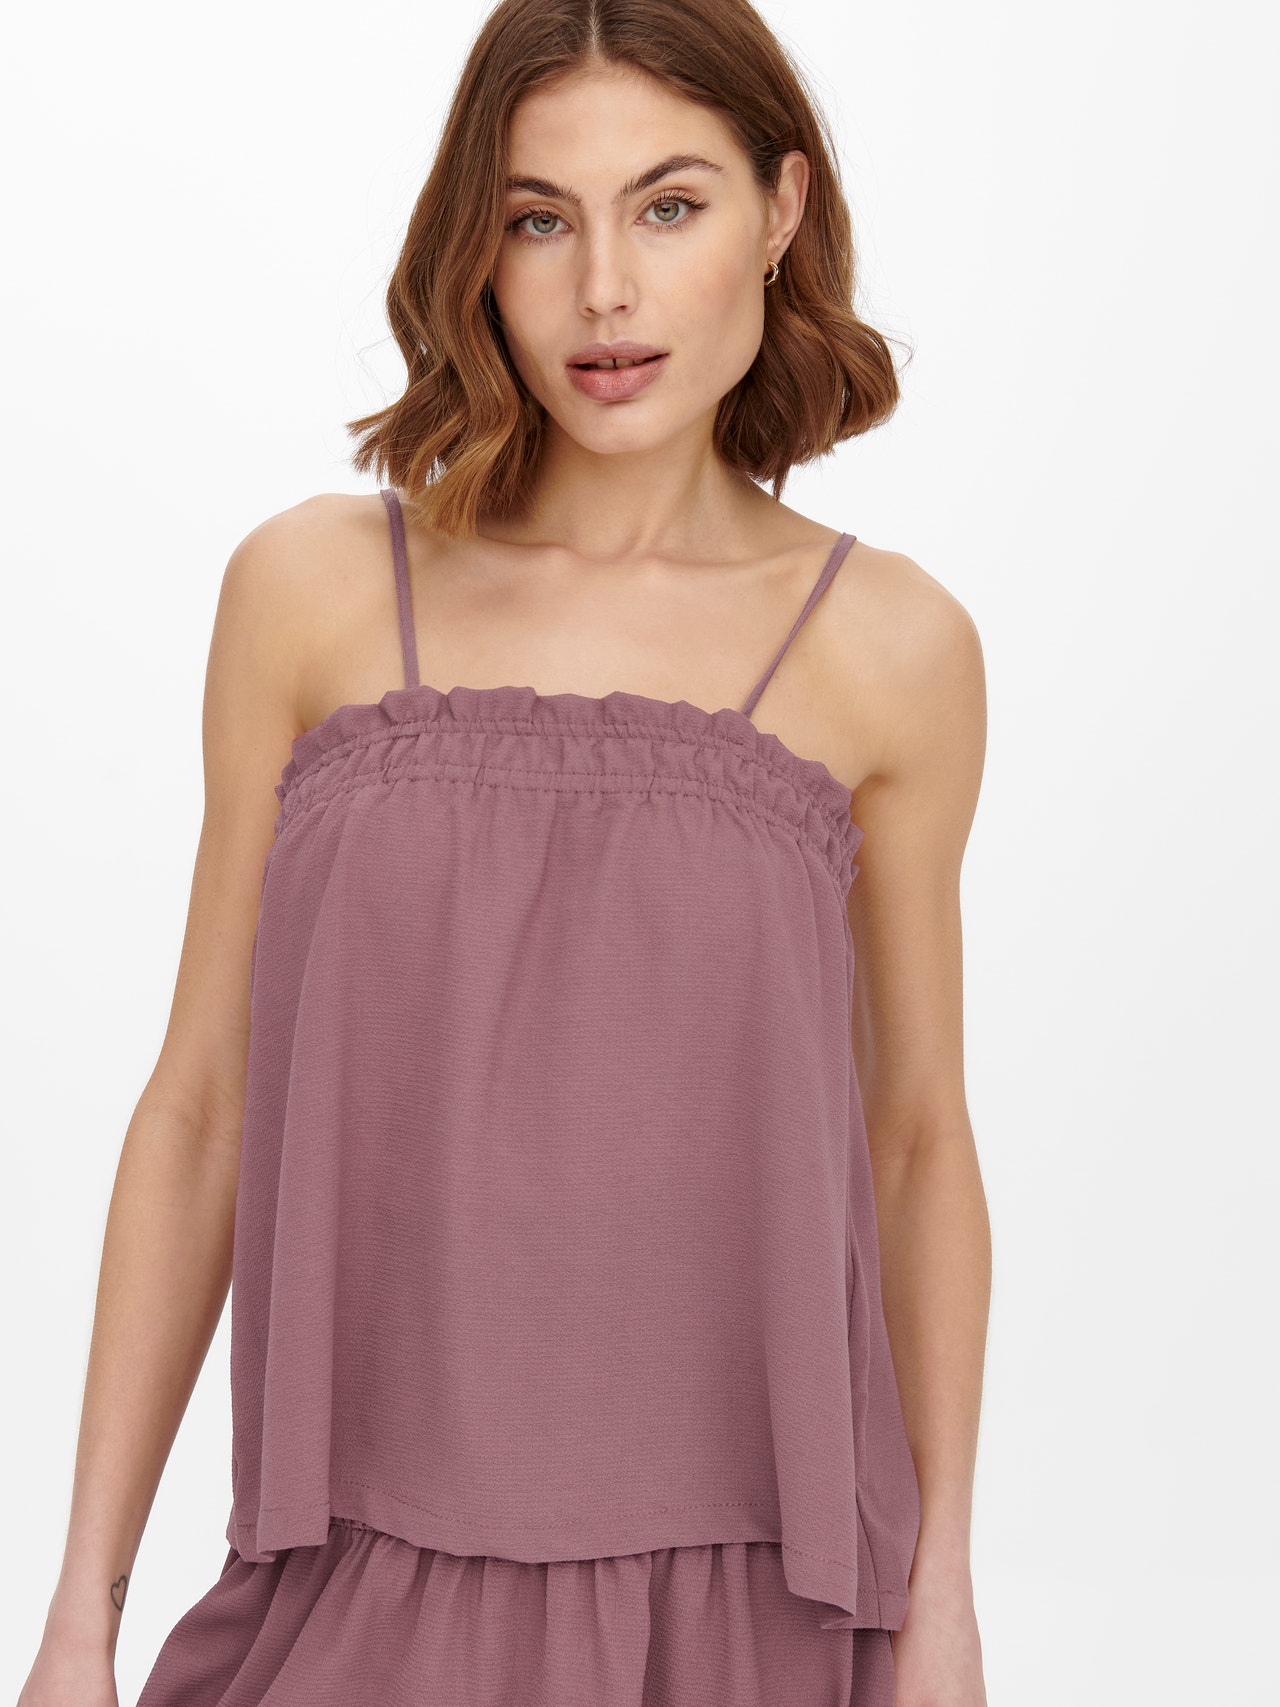 ONLY Solid colored strap top -Rose Brown - 15271377